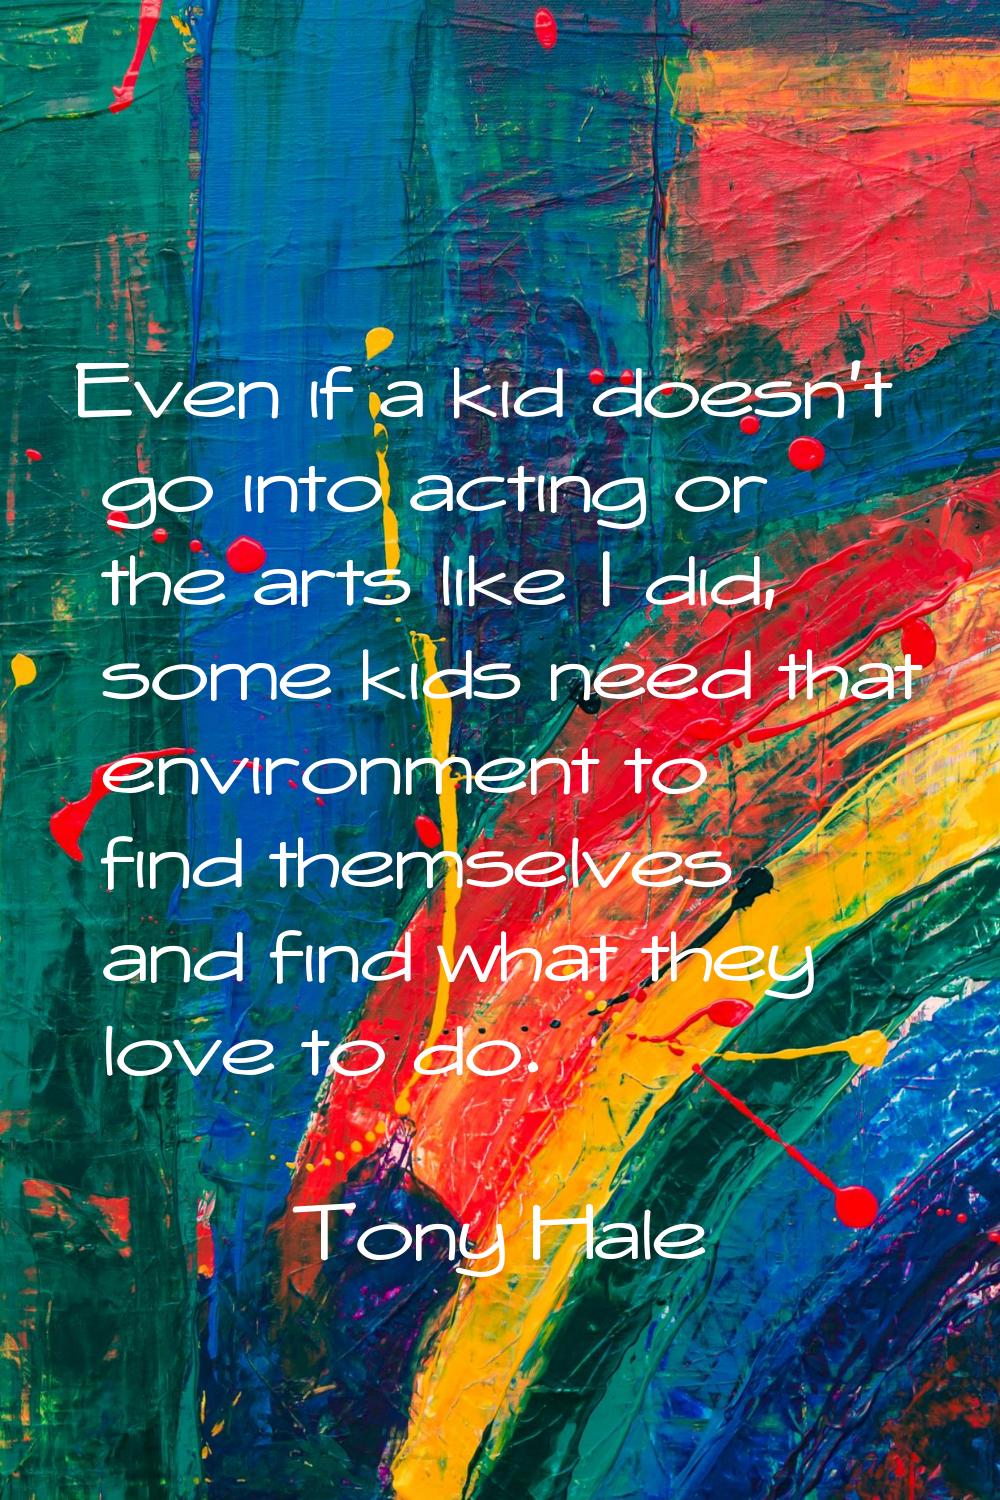 Even if a kid doesn't go into acting or the arts like I did, some kids need that environment to fin